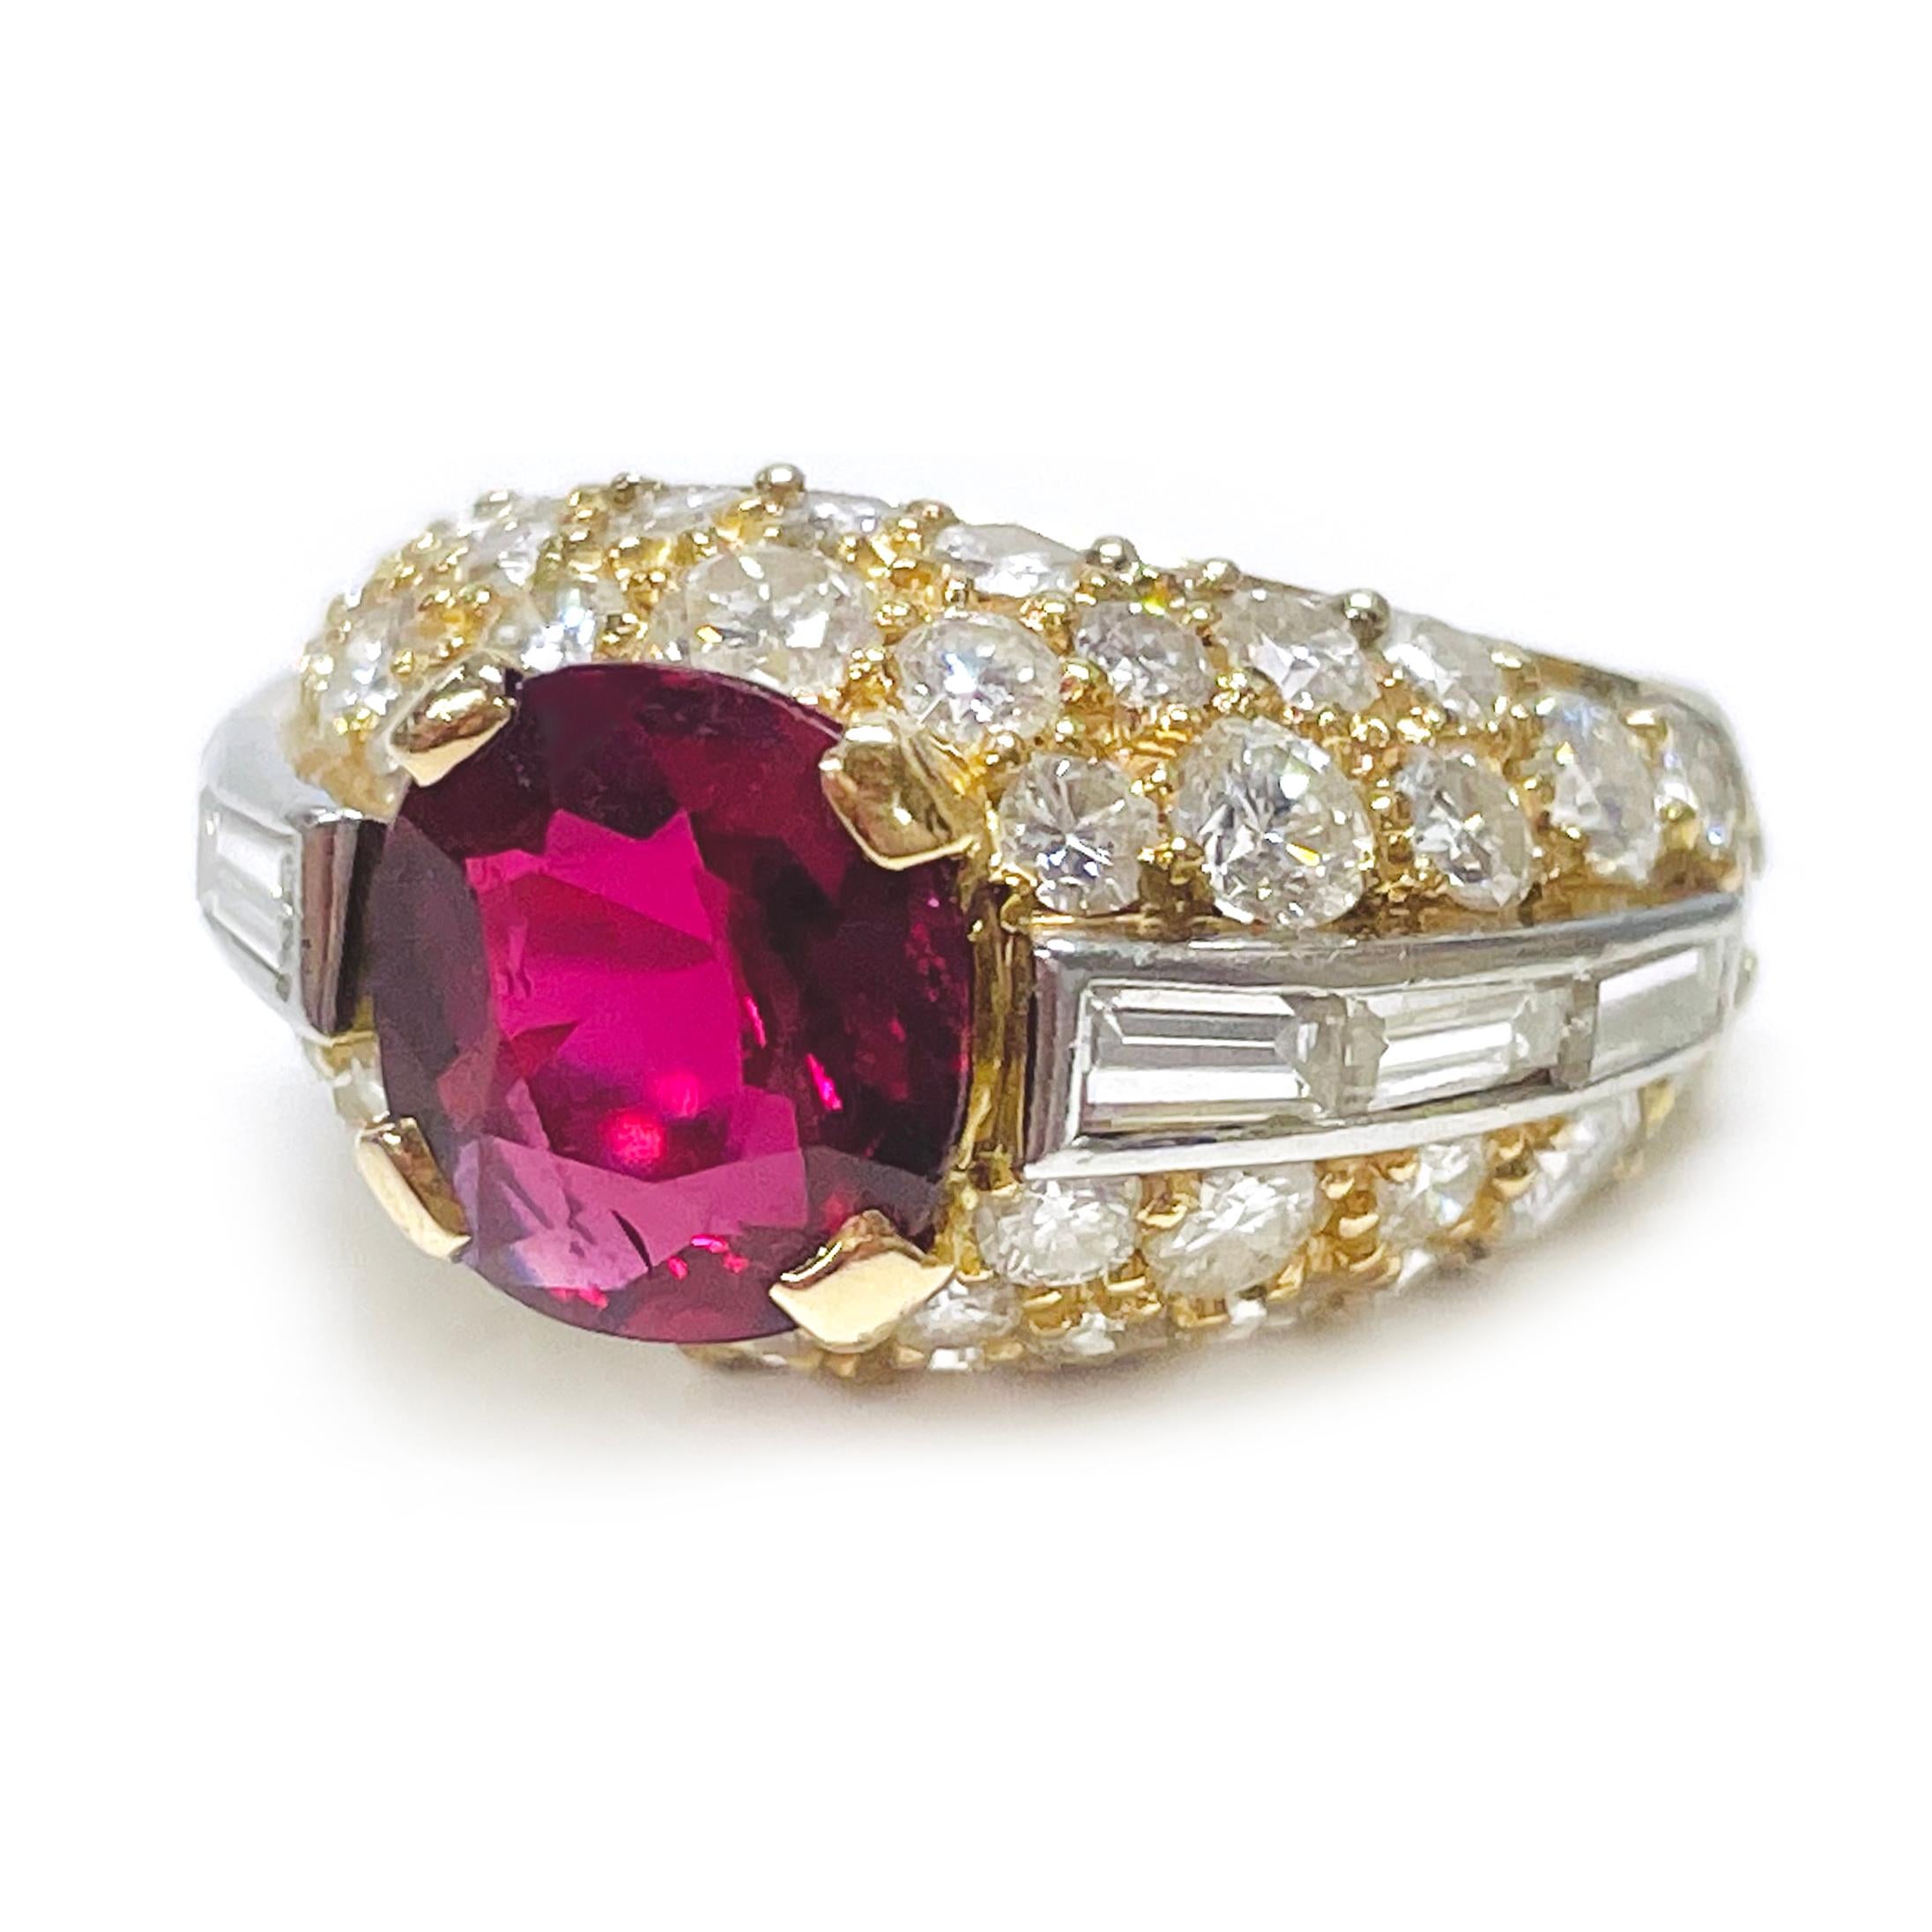 18 Karat Yellow Gold Ruby Diamond Hinged Ring. Stamped on the inside of the band is 18K. The ring size is 3 1/4. An A.I.G. appraisal is included in purchase (see last photo). 

One electronically tested 14KT yellow gold ladies cast & assembled ruby